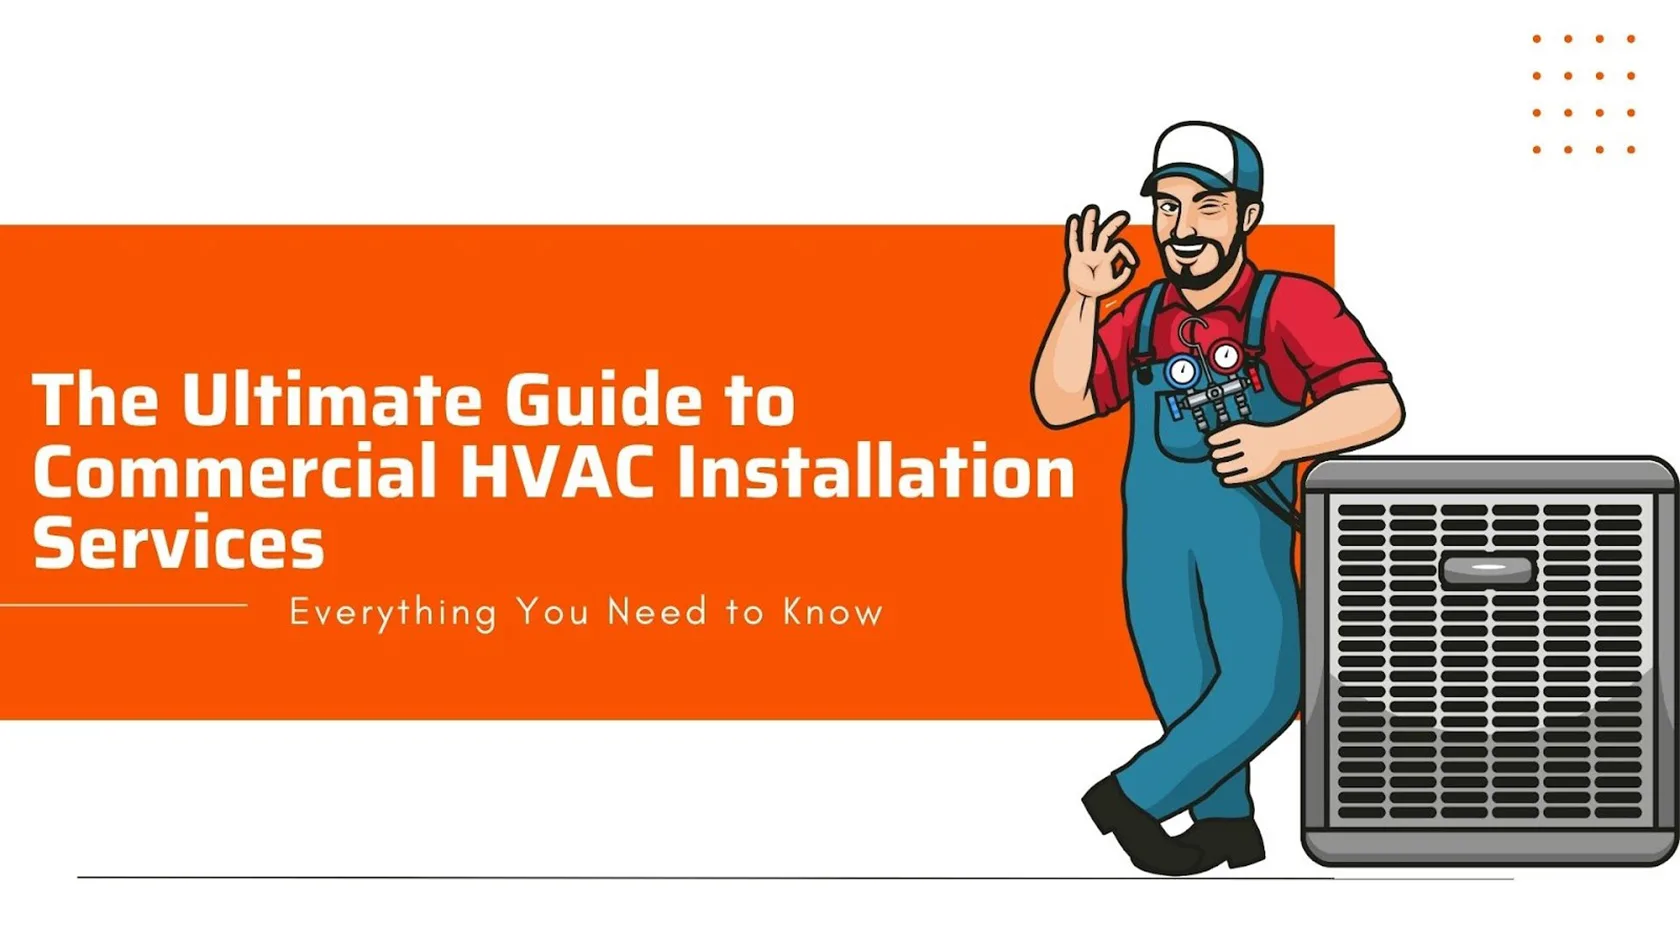 The Ultimate Guide To Commercial HVAC Installation Services: Everything You Need To Know